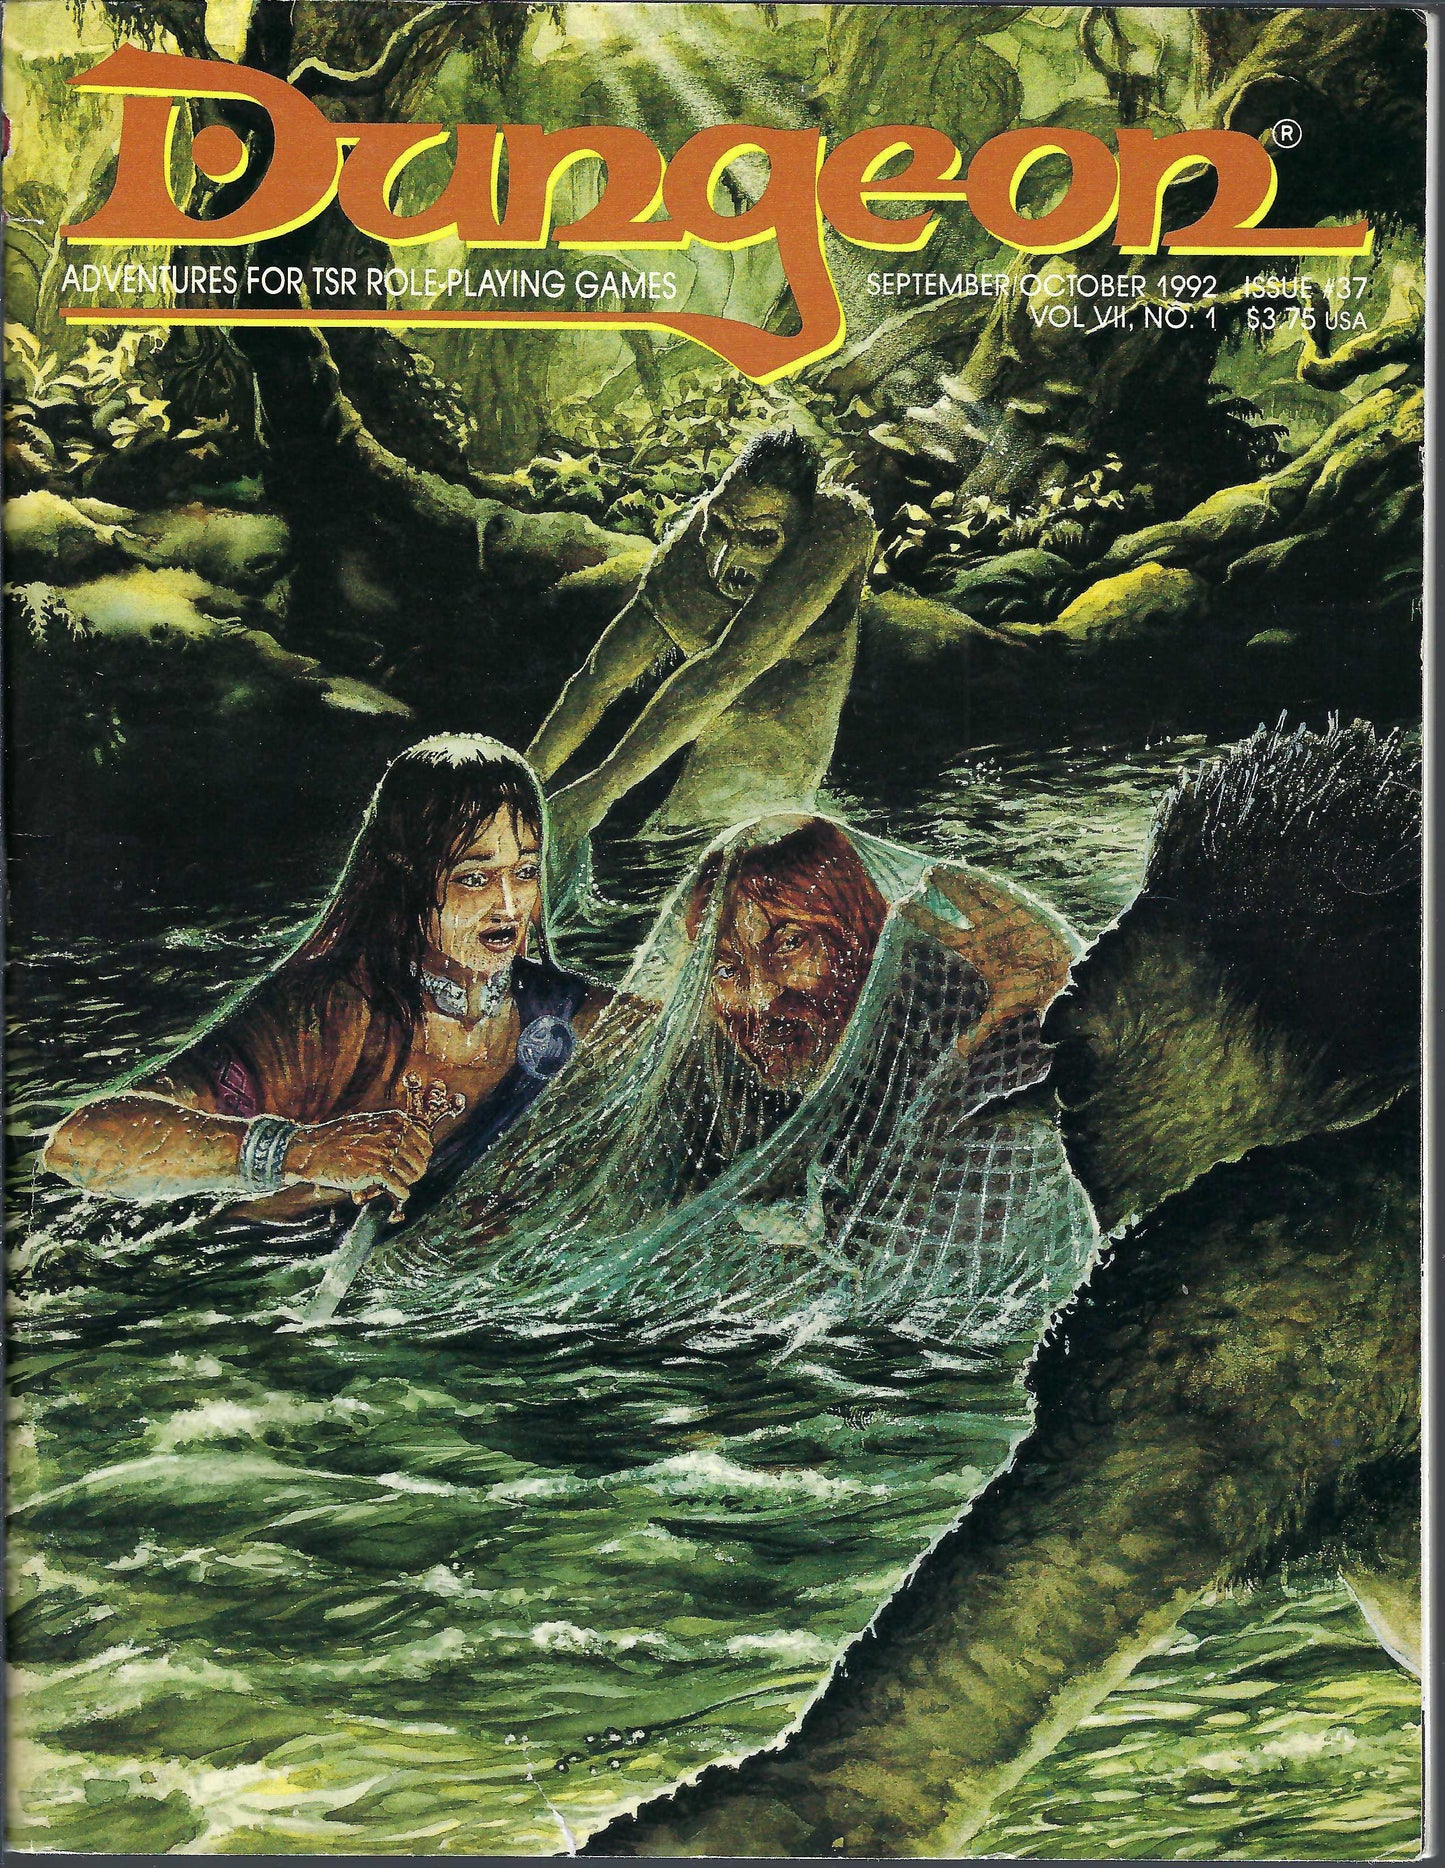 Dungeon Magazine issue 37 front cover